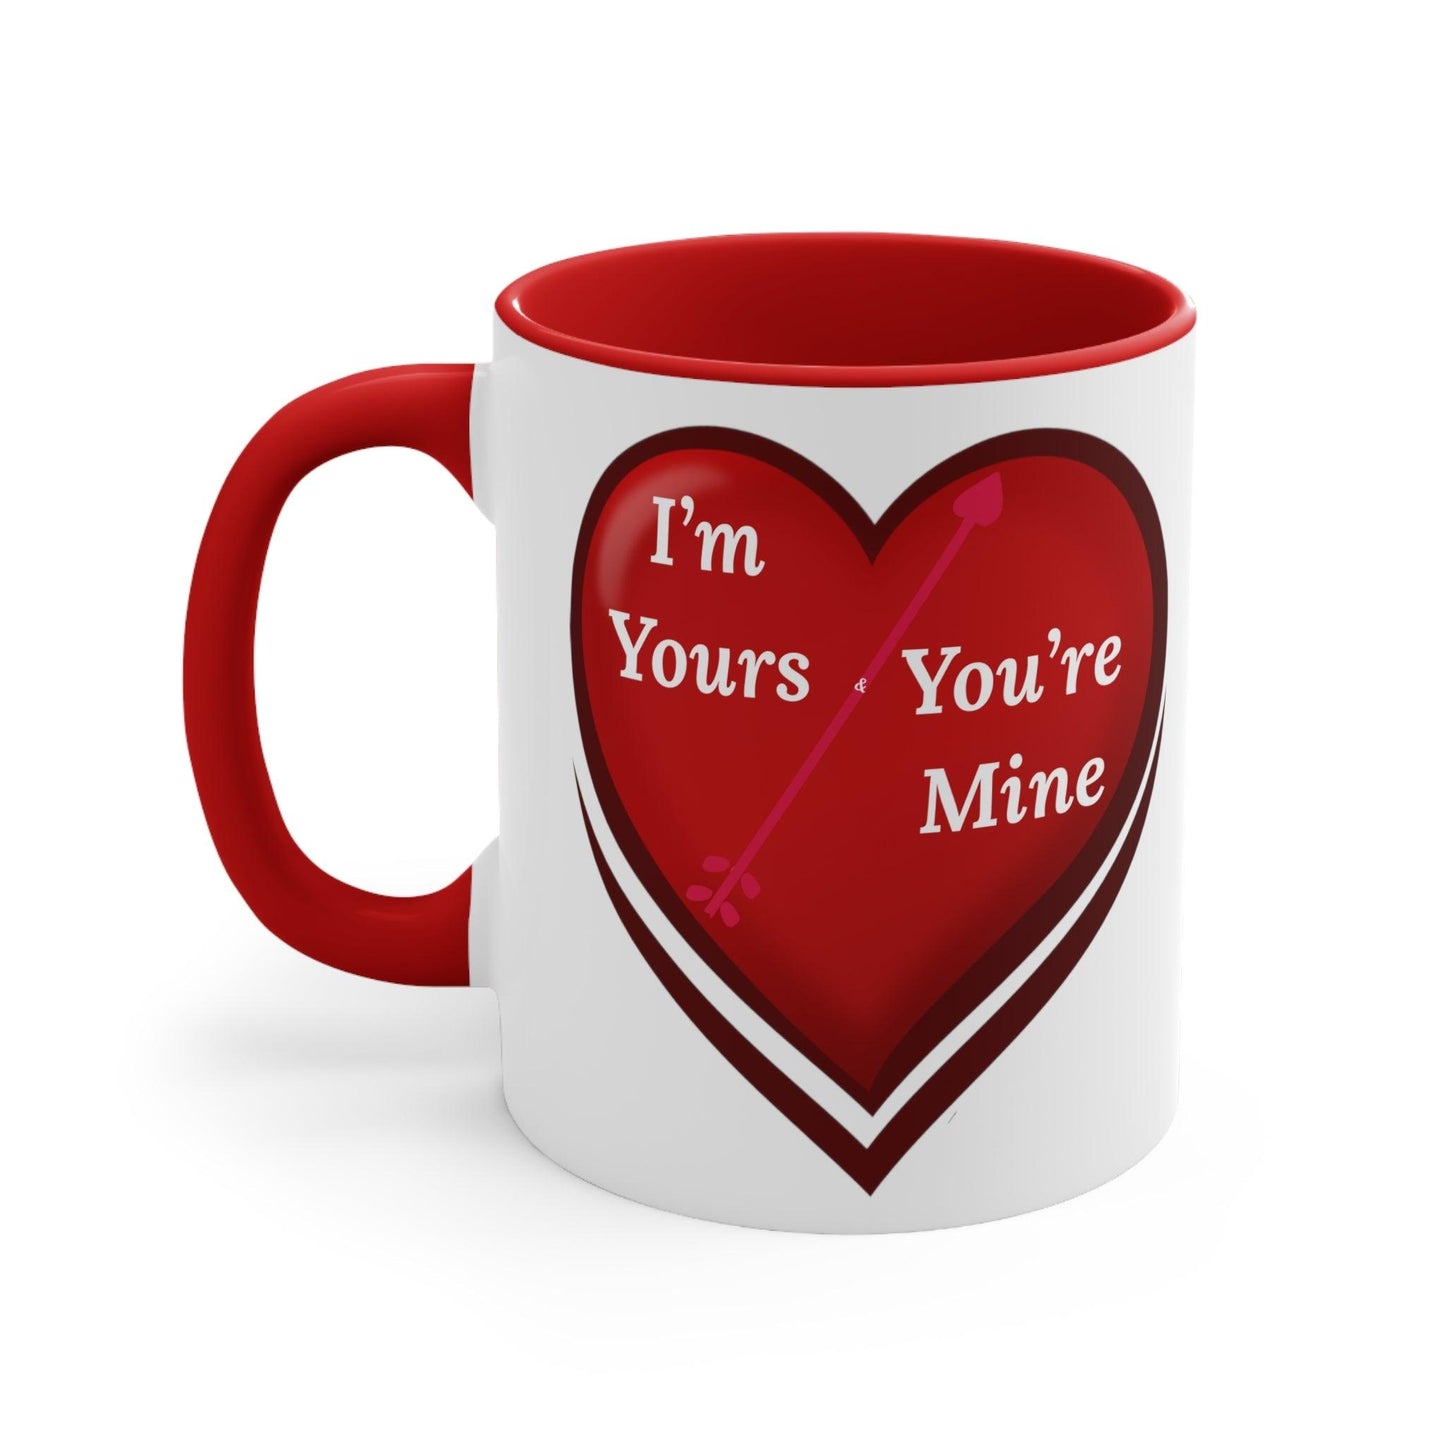 I'm Yours and You're Mine with Heart Mug, 11oz - Giftsmojo